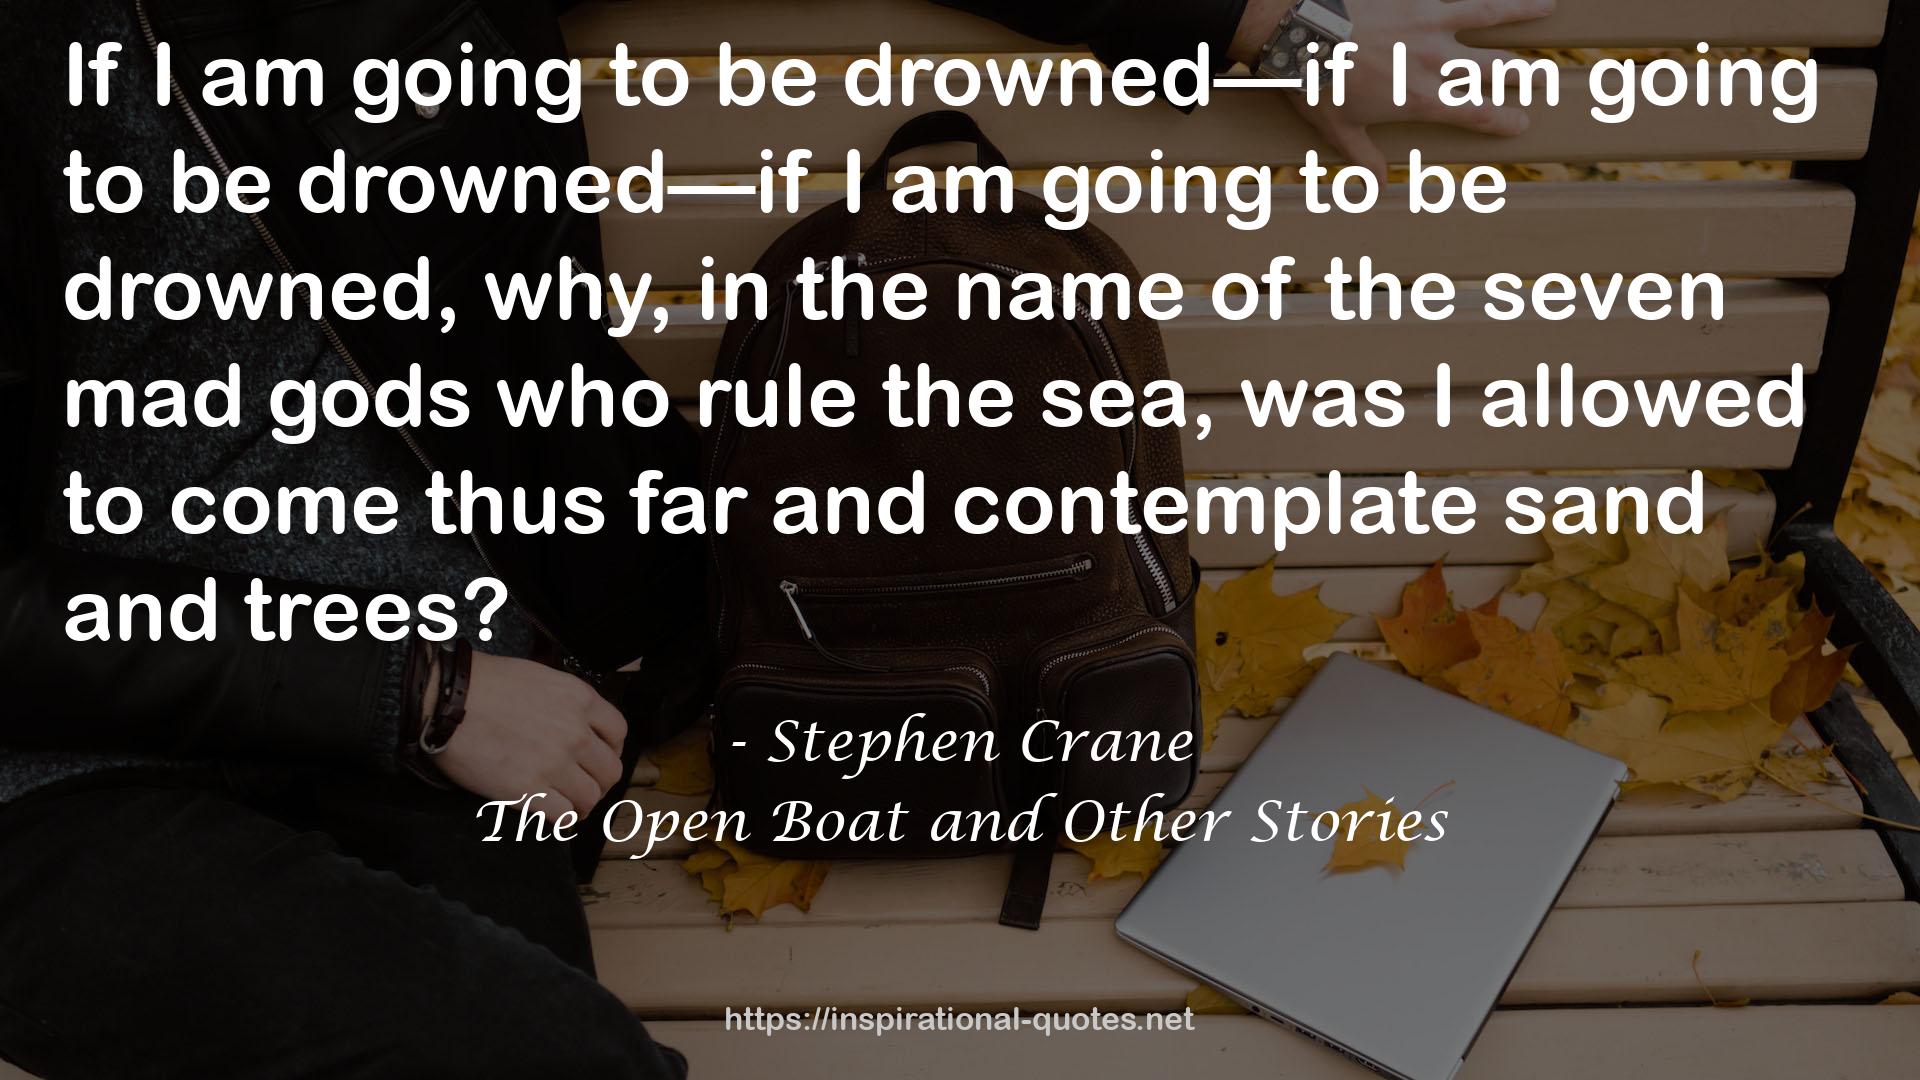 The Open Boat and Other Stories QUOTES